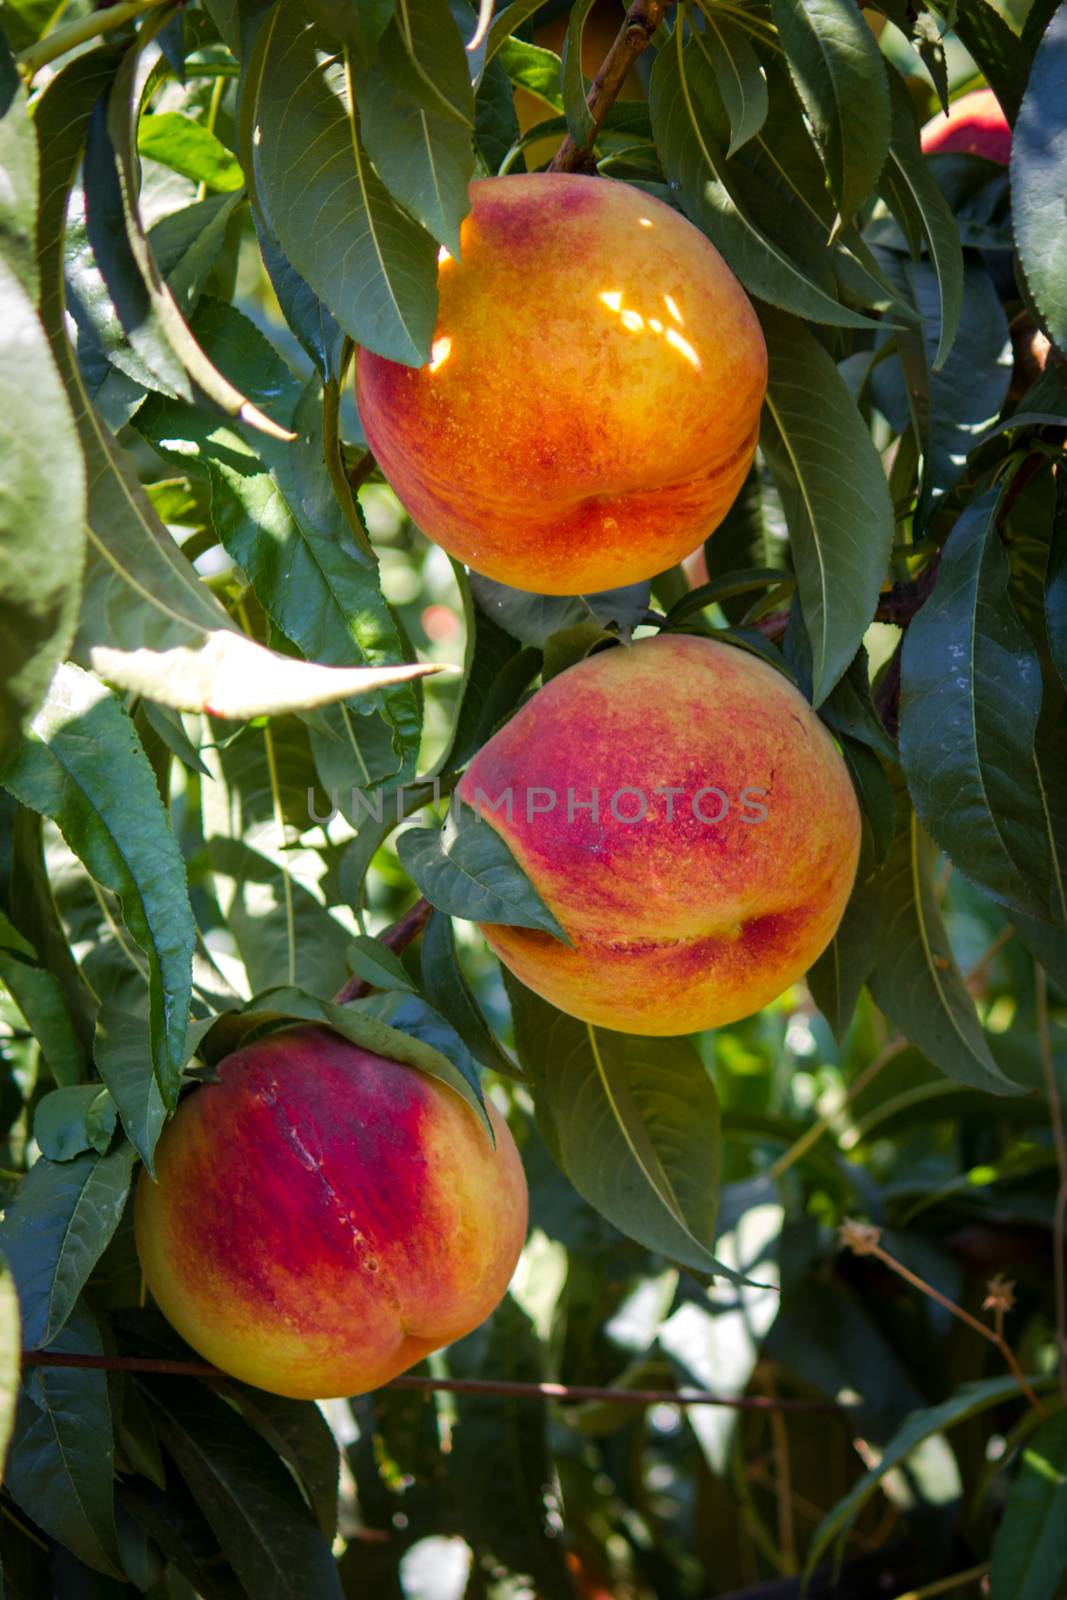 The sun-ripened peaches from Sicily